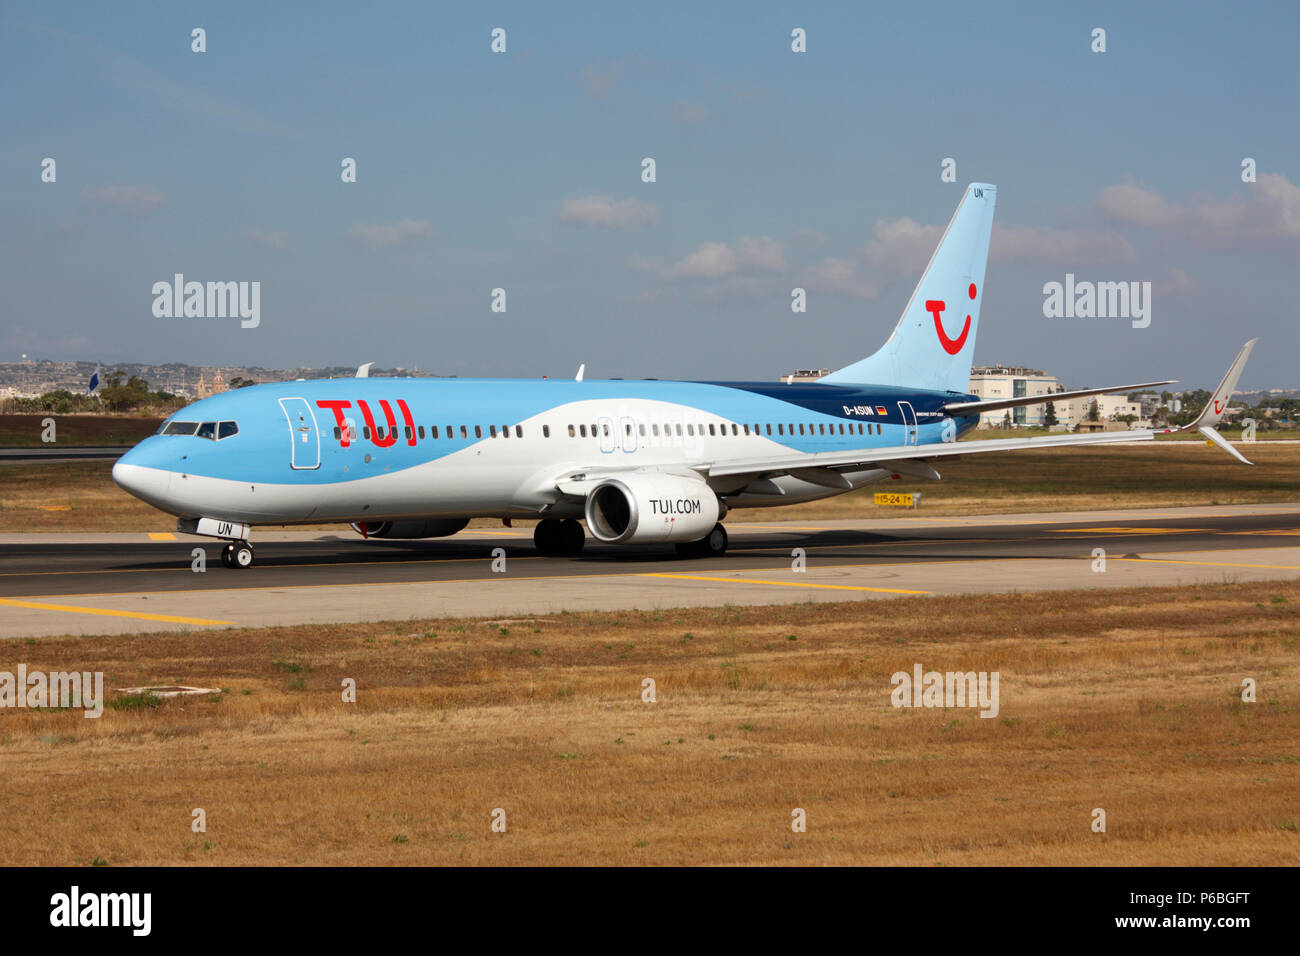 TUI Airways Boeing 737-800 (737NG or Next Generation) passenger jet plane taxiing on airport taxiway before departure from Malta. Modern aviation. Stock Photo